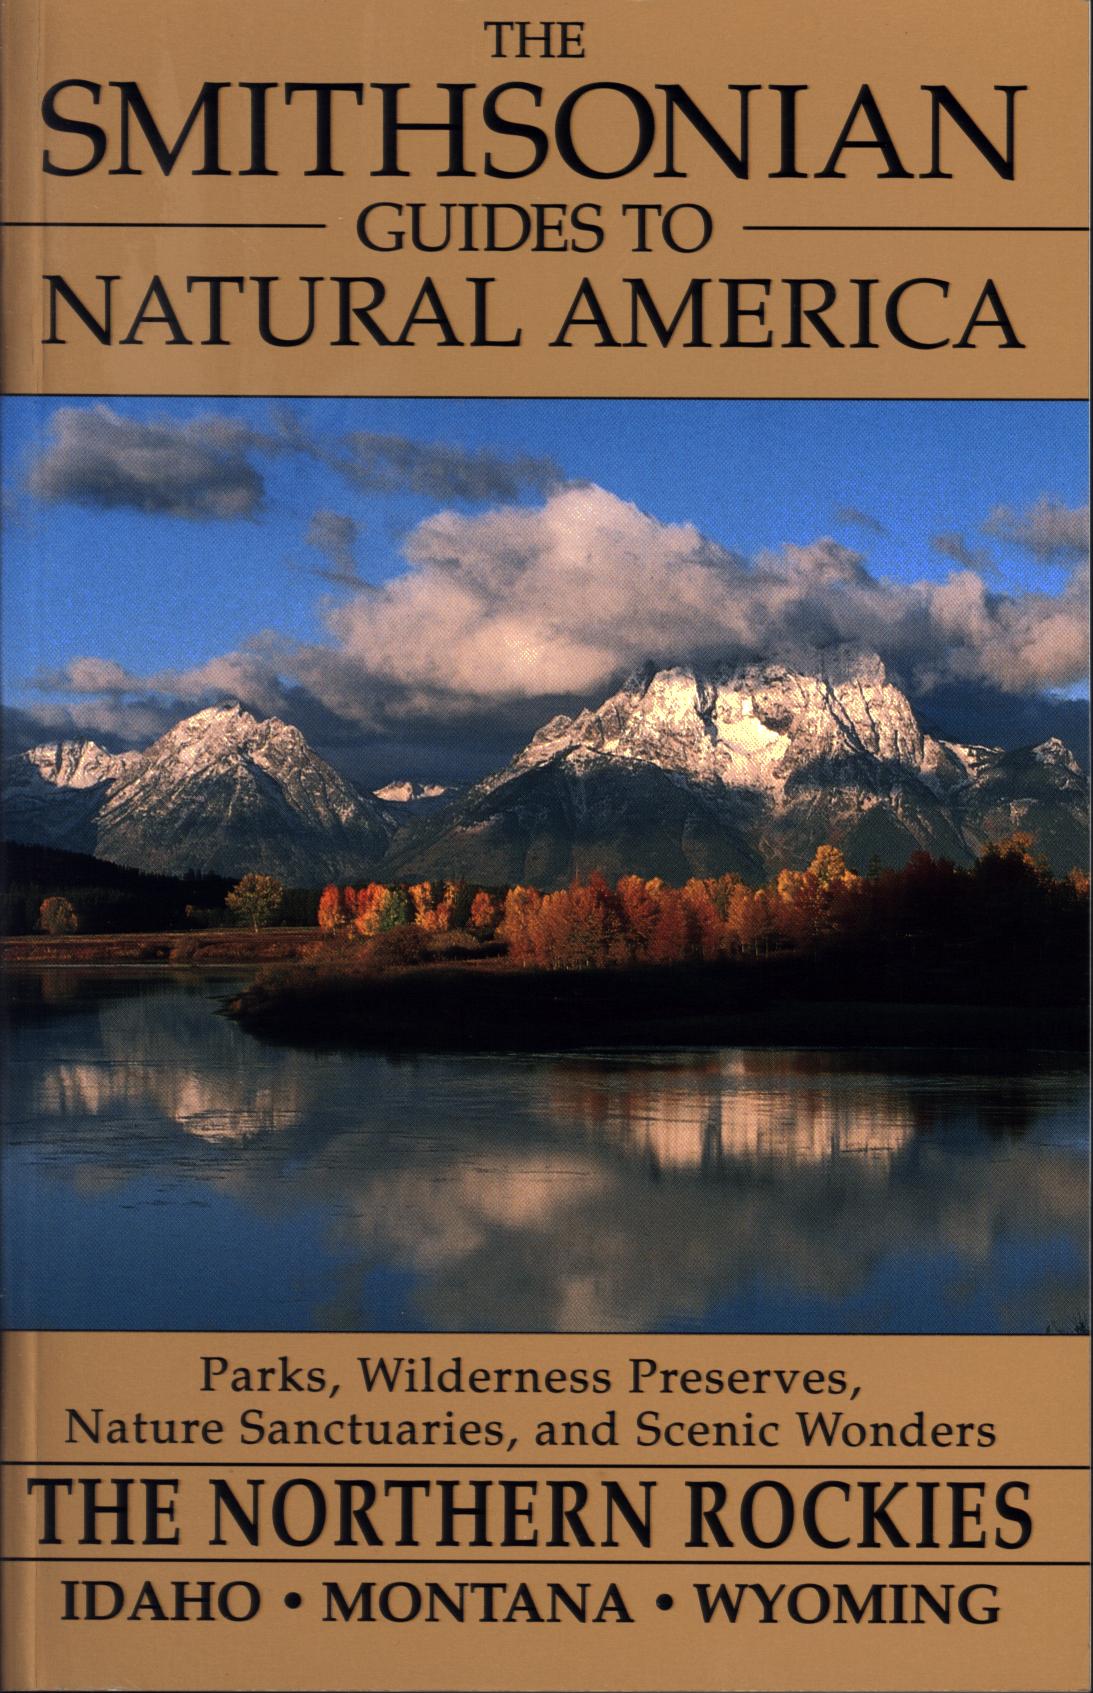 THE SMITHSONIAN GUIIDES TO NATURAL AMERICA: the Northern Rockies. 